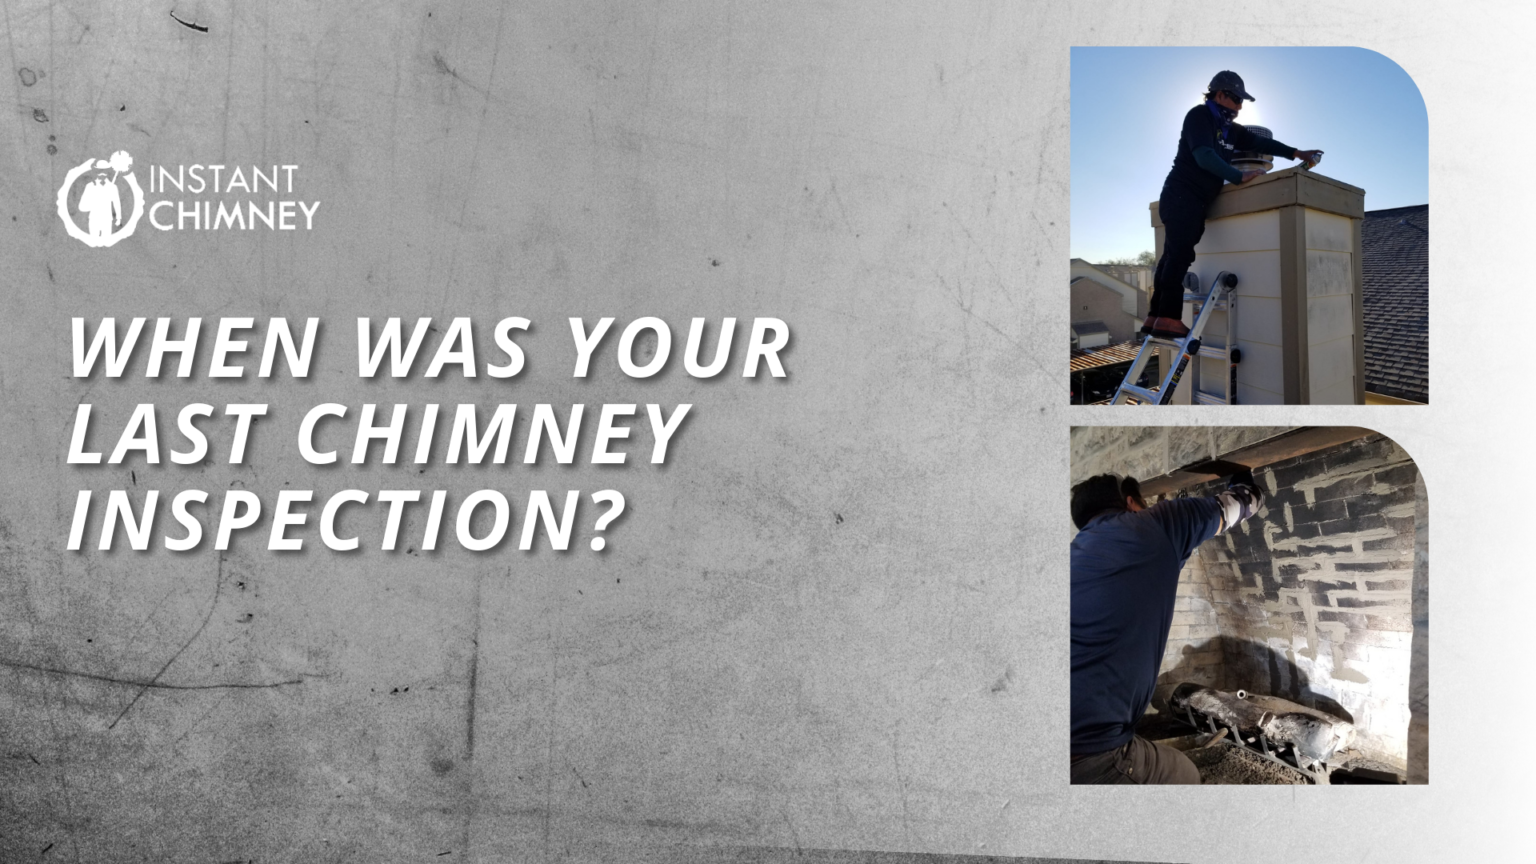 When was your last Chimney Inspection?